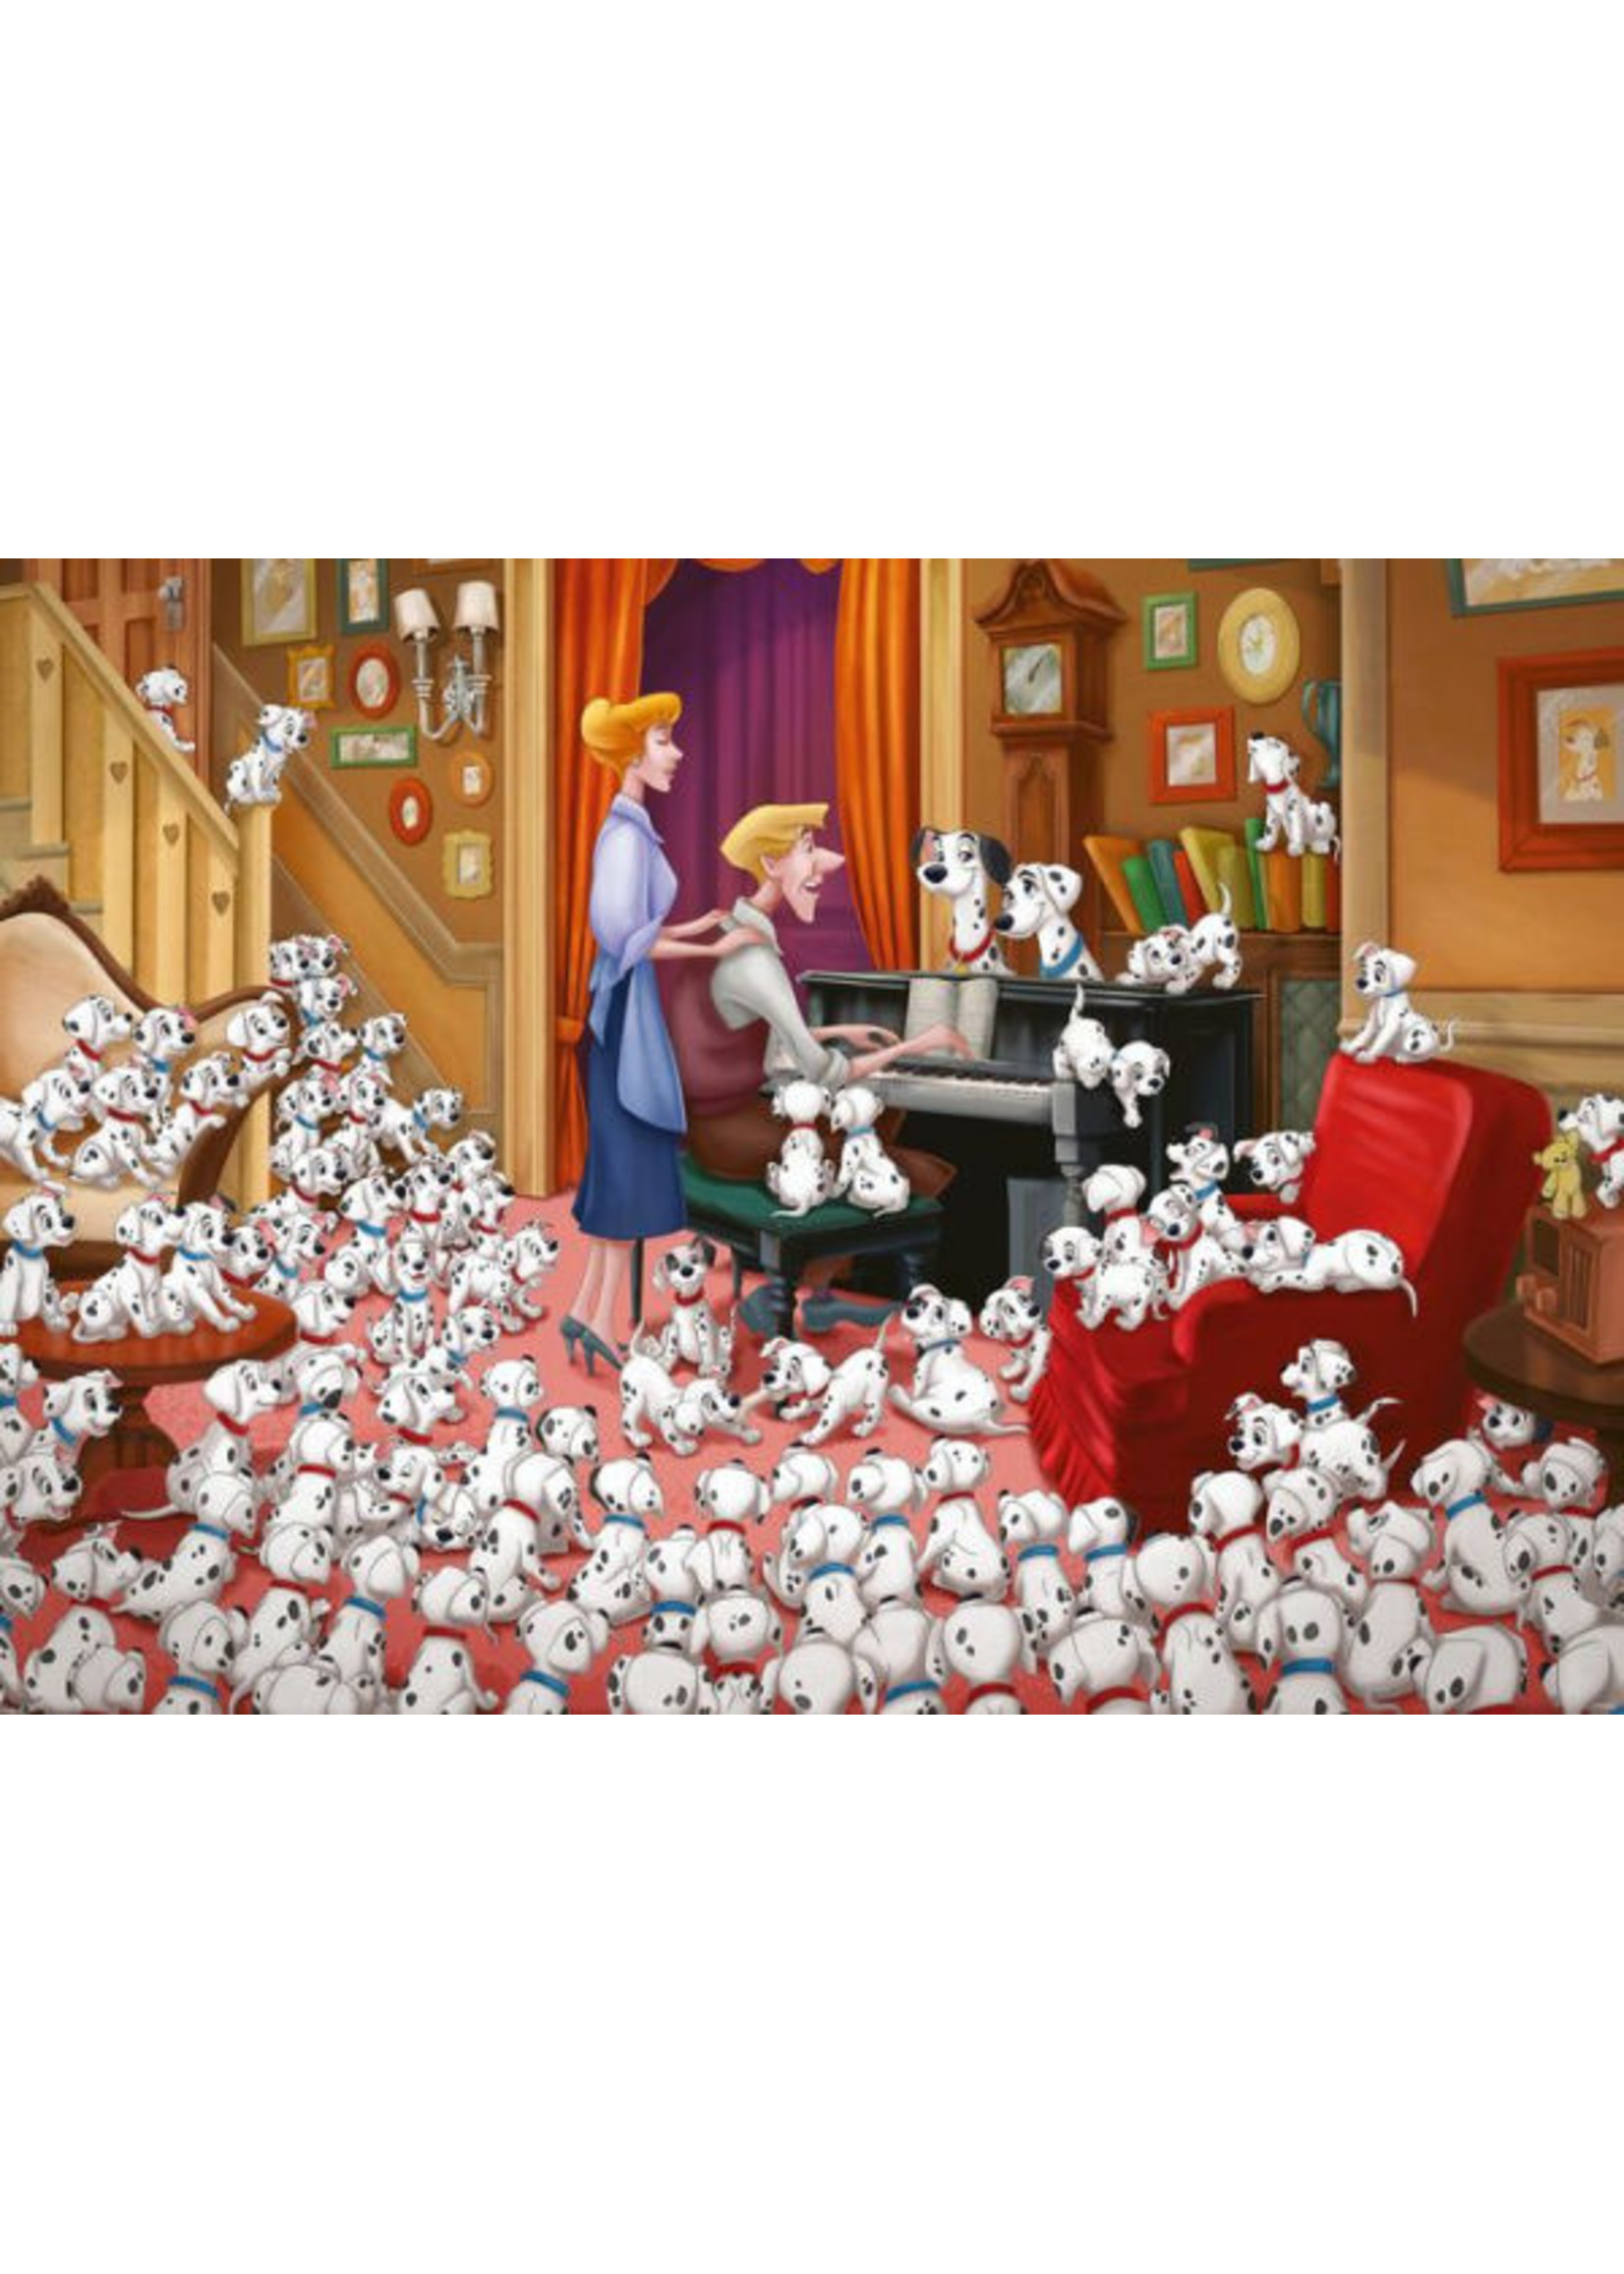 Ravensburger Collector's Edition: 101 Dalmations - 1000 Piece Puzzle